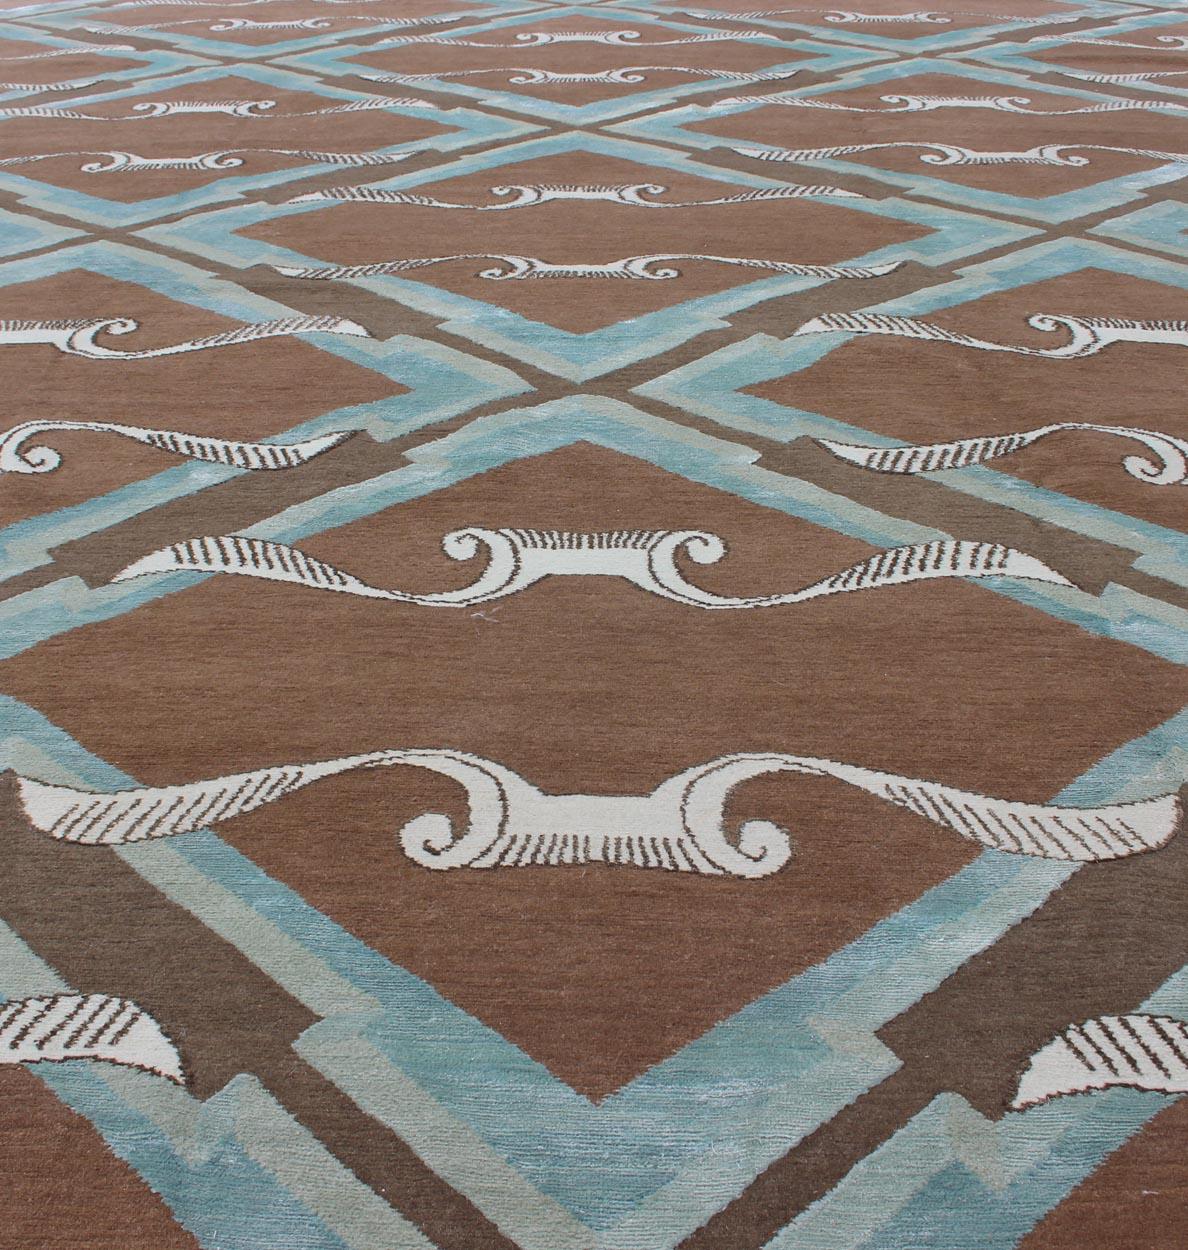 Pure Silk and Wool Nepalese Modern Design Rug in Brown, Blue and Diamond Design 5